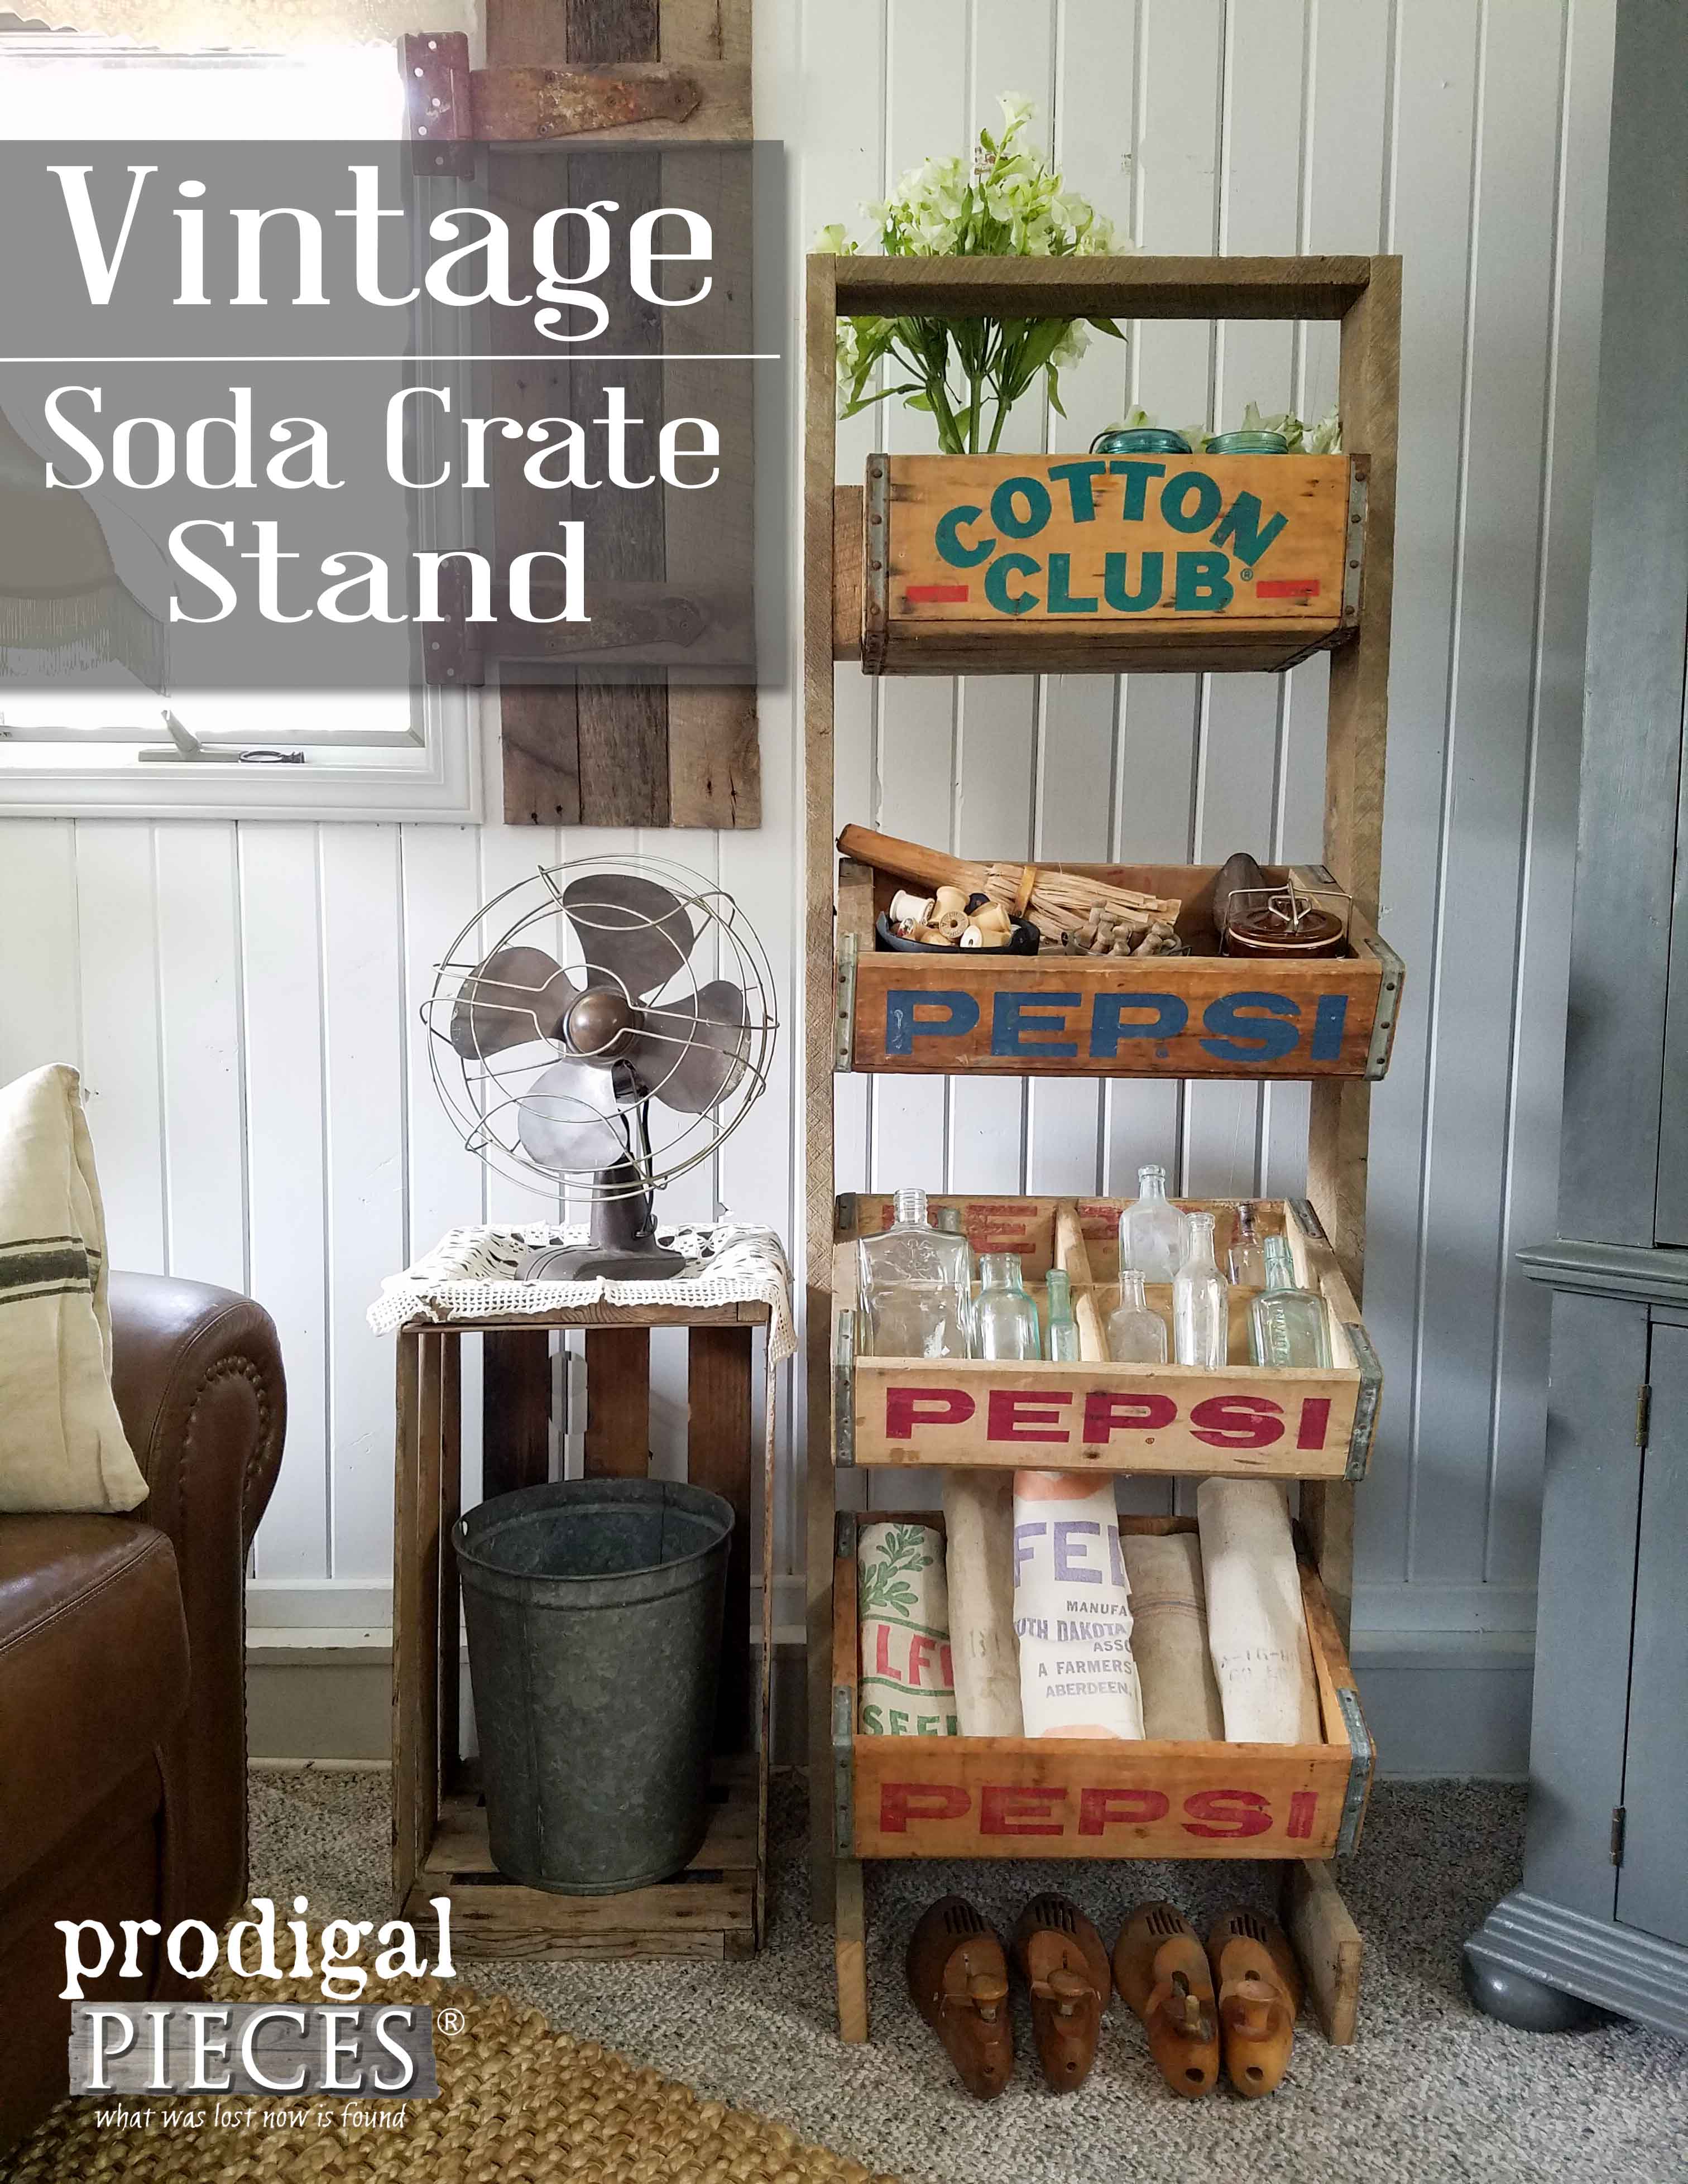 Create a Soda Crate Stand from Vintage Crate and Reclaimed Barn Wood for Home Decor or Shop Display by Prodigal Pieces | www.prodigalpieces.com